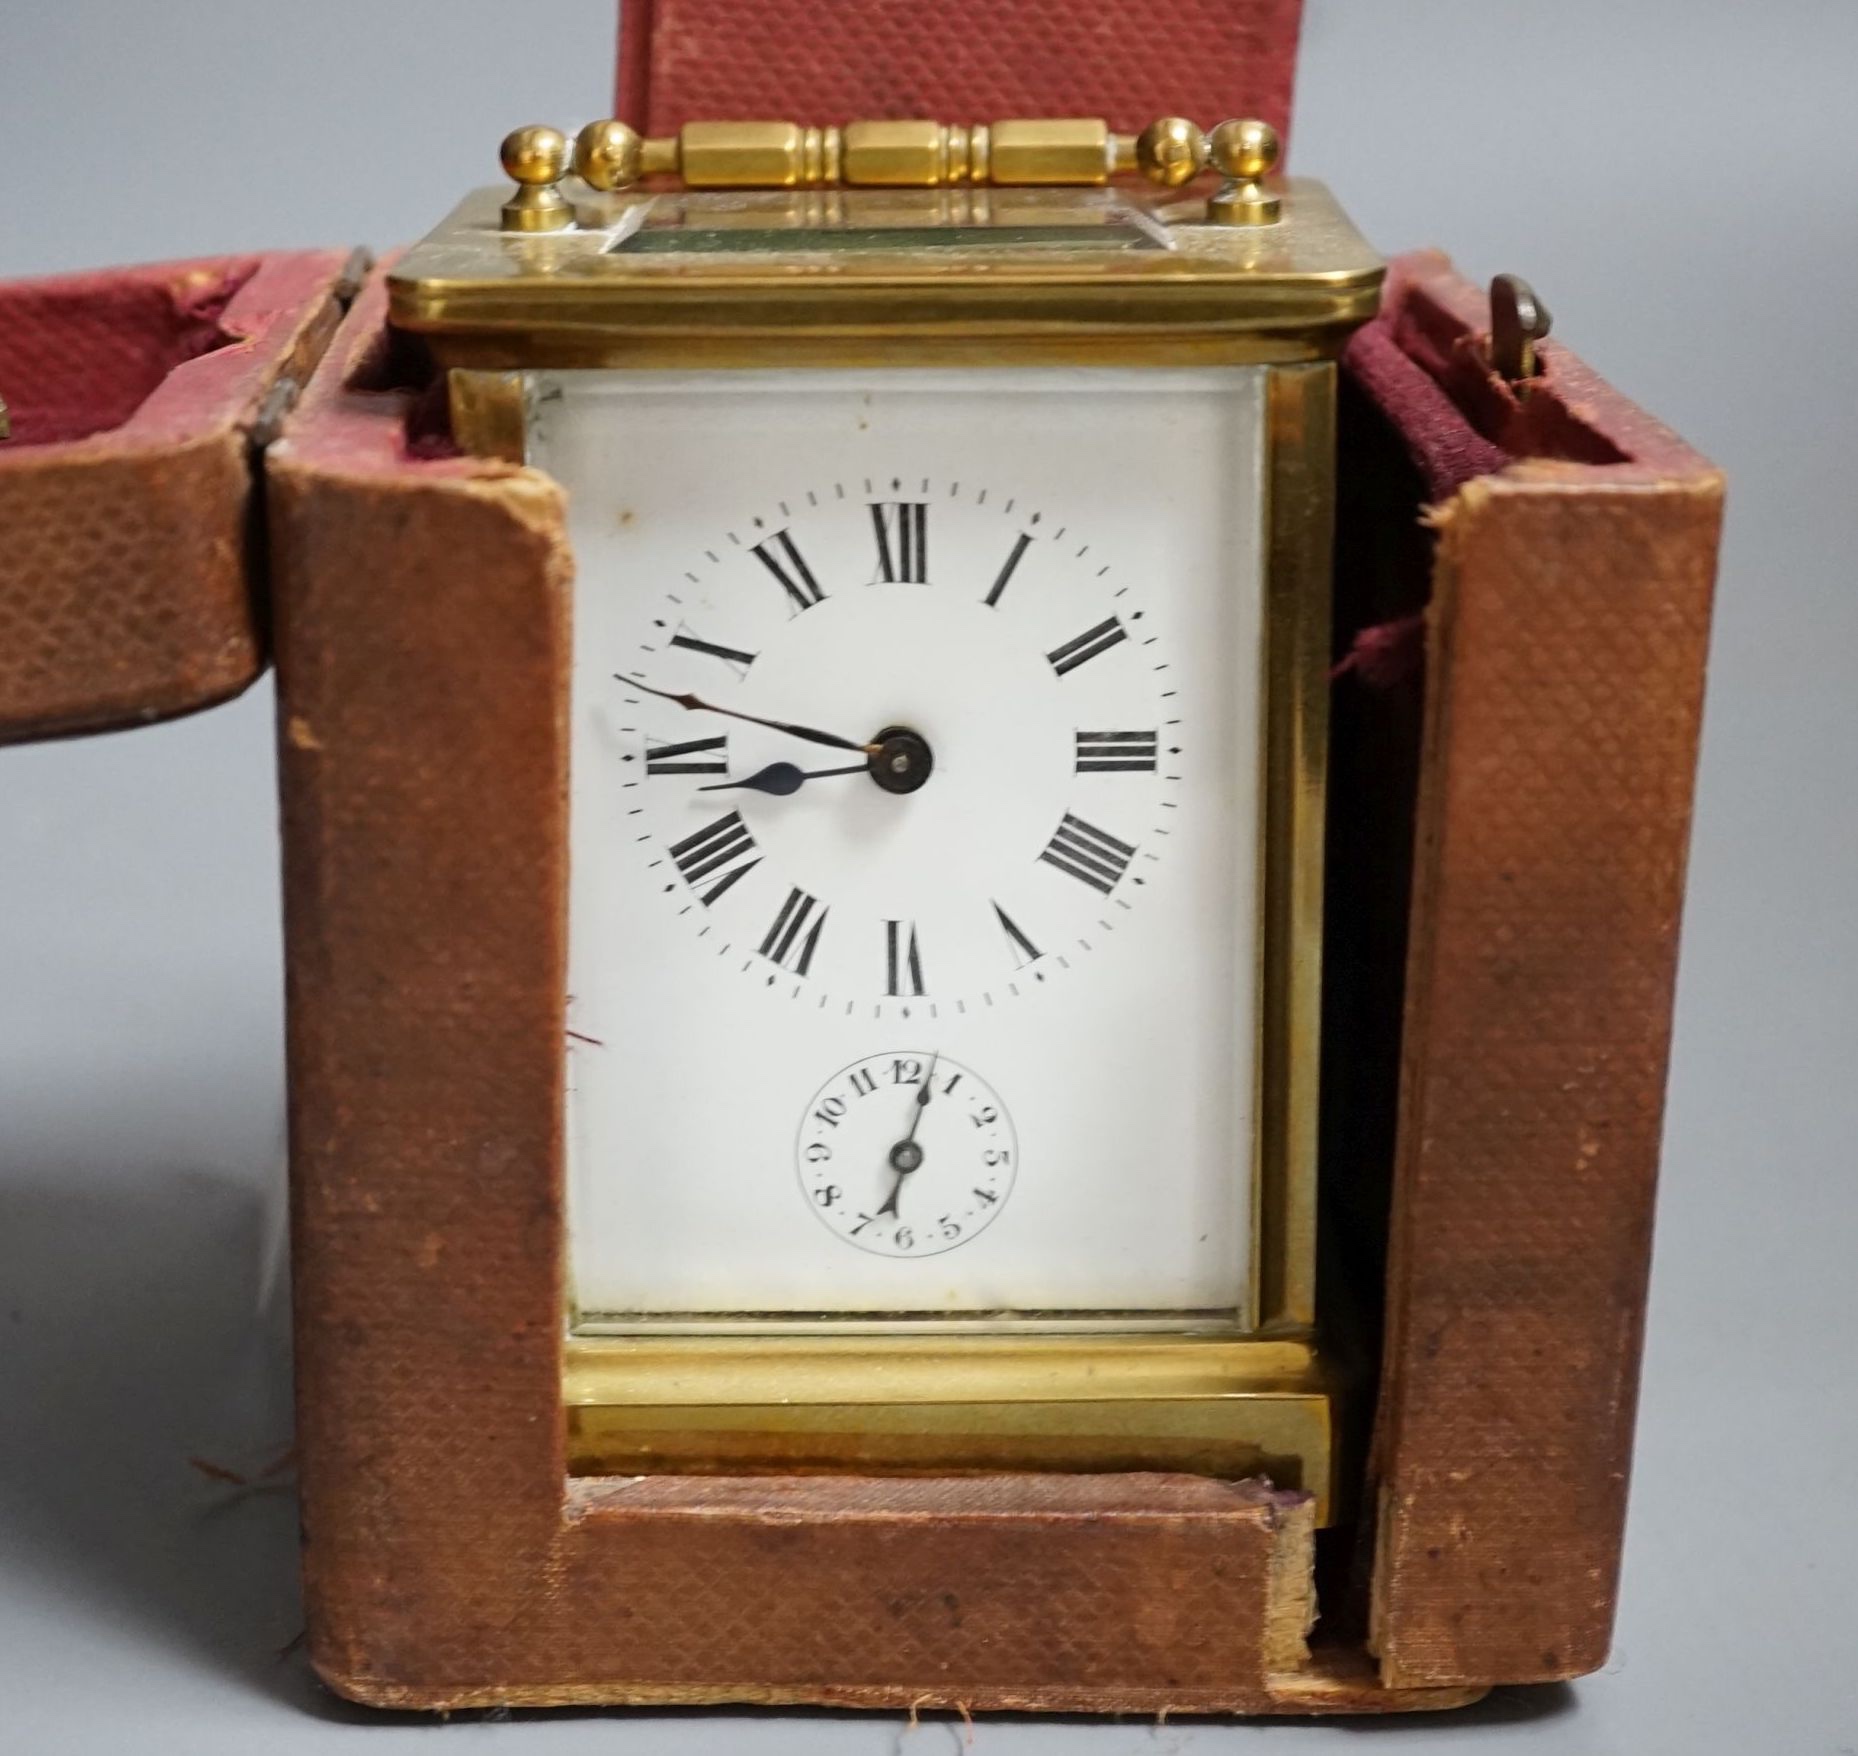 French carriage timepiece with original box and receipts - key included, 11cm high - Image 4 of 4